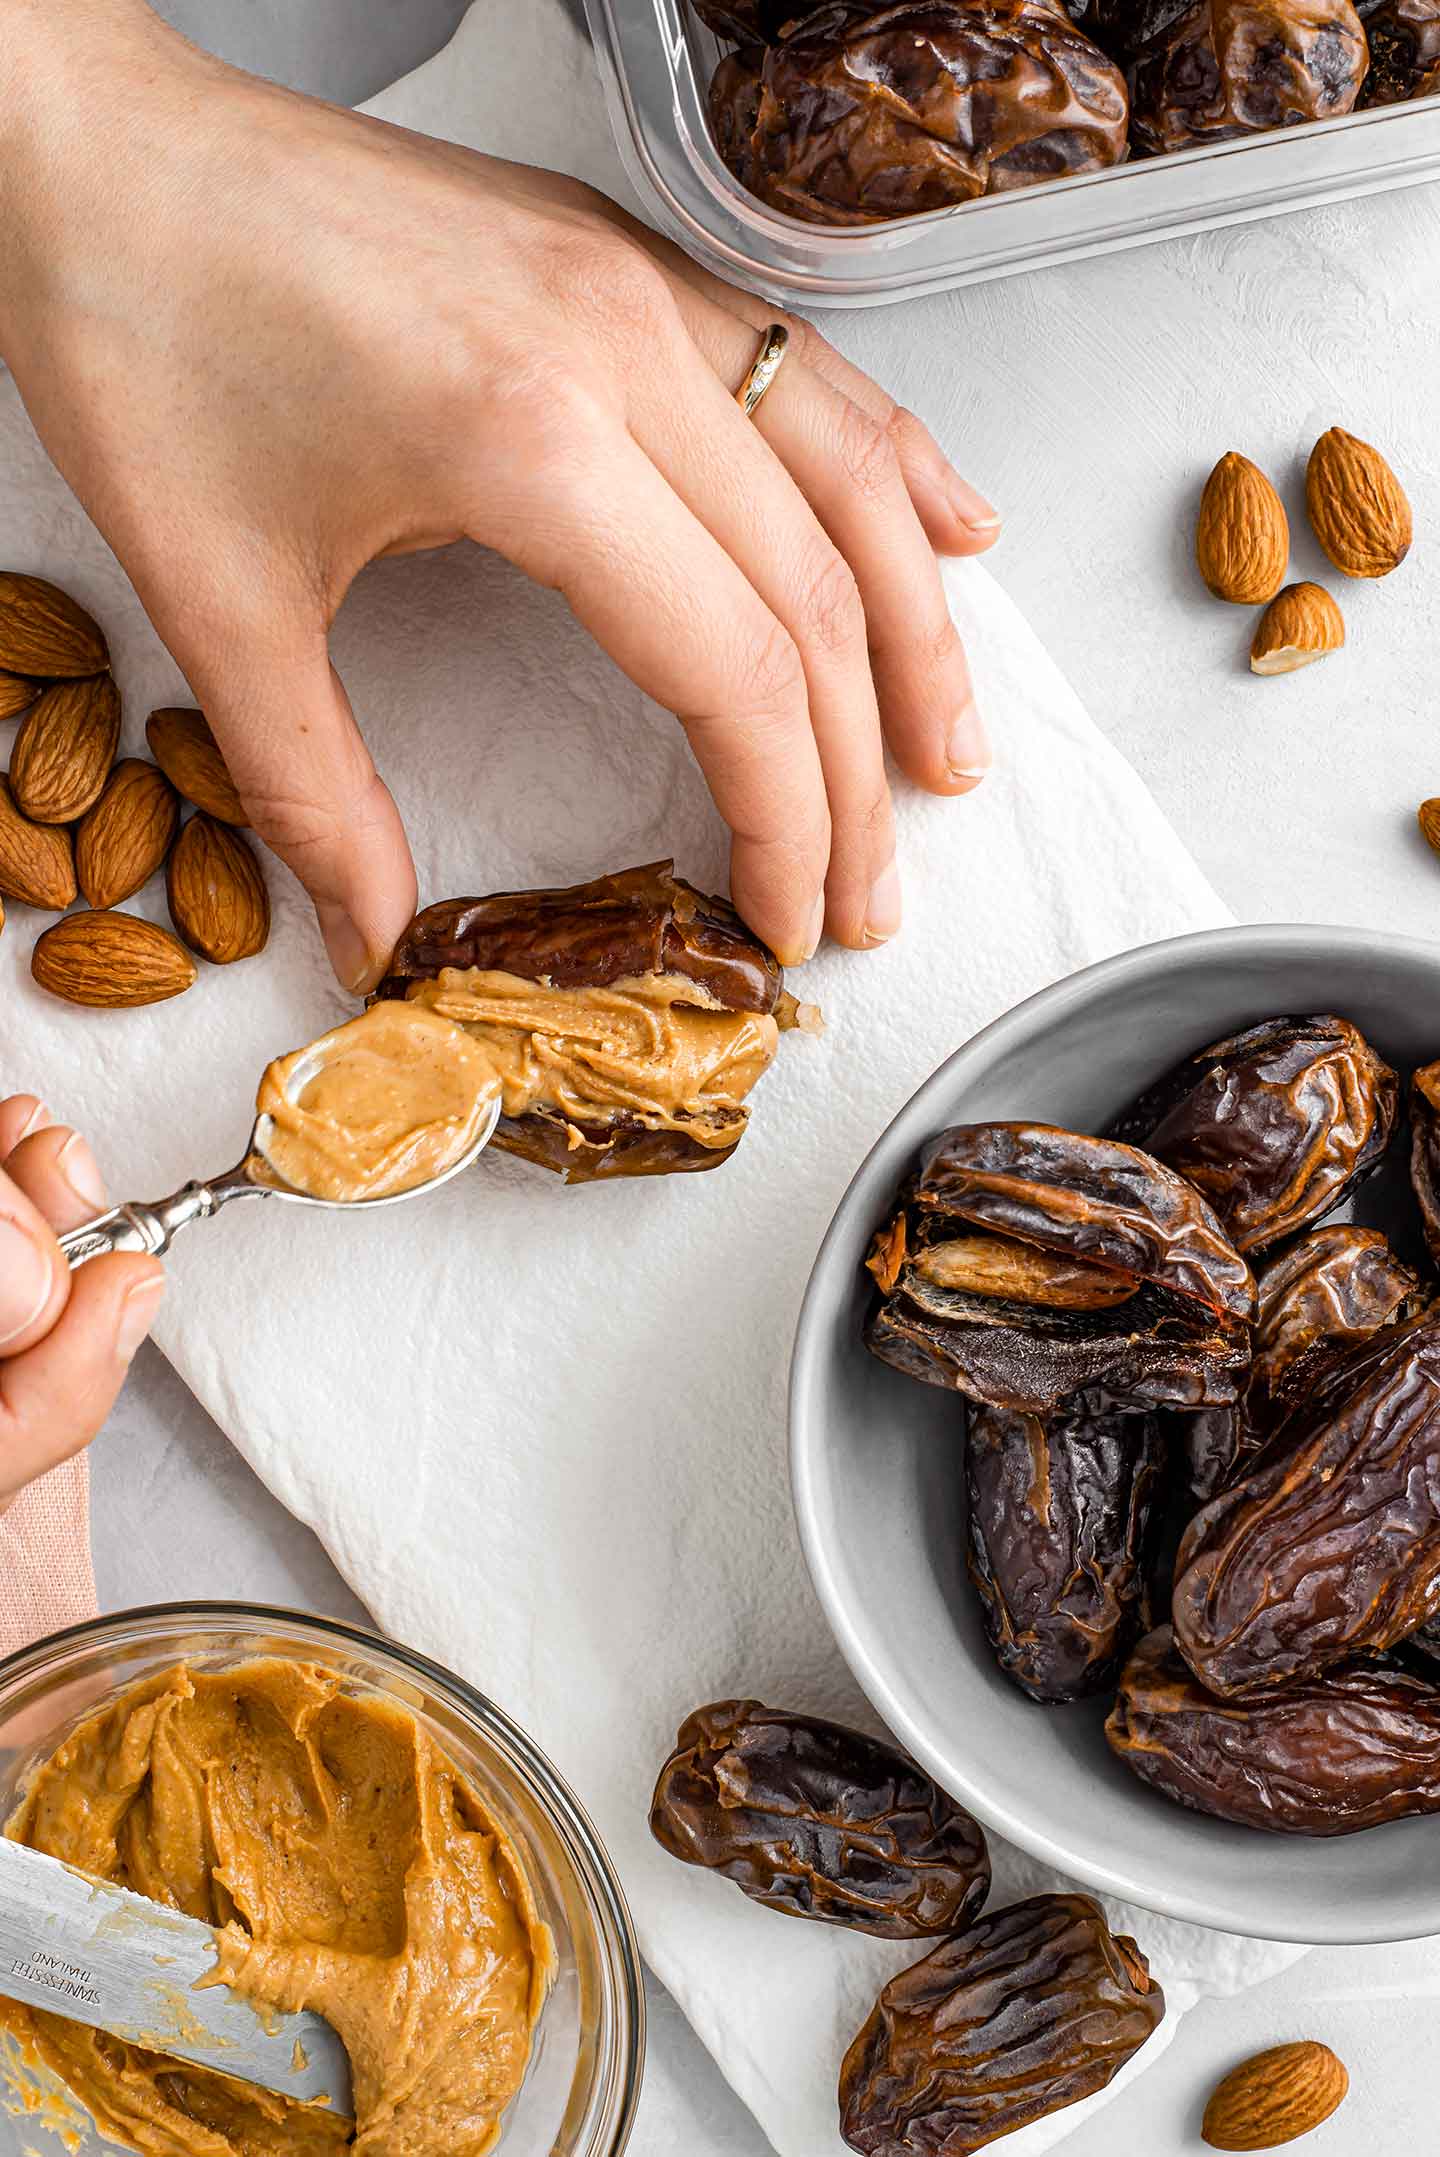 A hand spoons peanut butter into the centre of a medjool date. A bowl of other dates, loose almonds, and a bowl of peanut butter surround the hands.